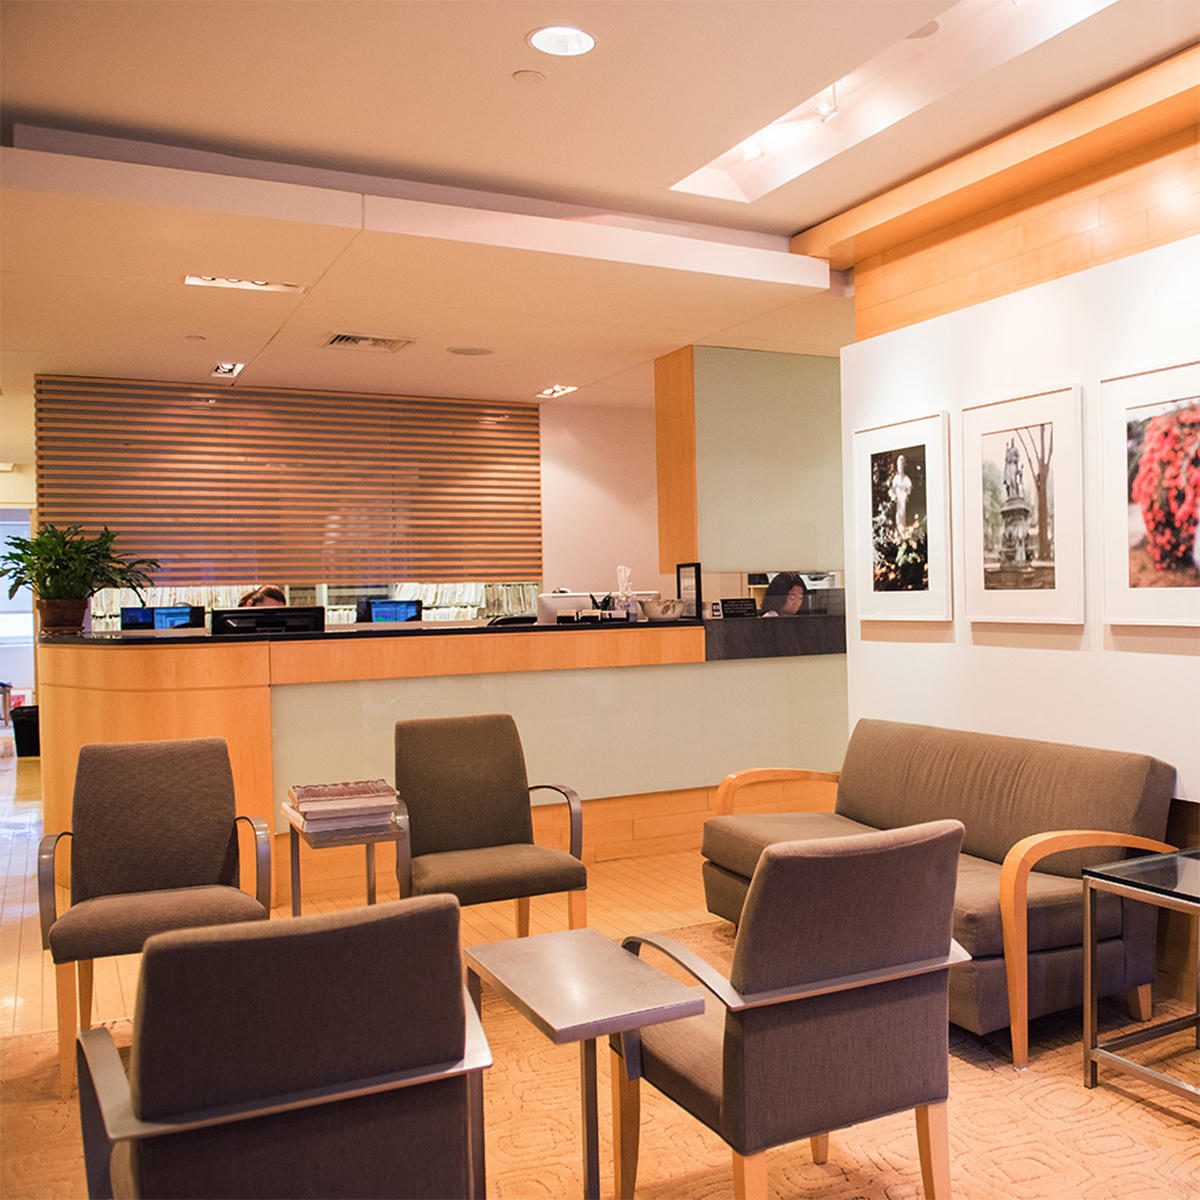 Christopher L. Barley, M.D. provides a calm & friendly atmosphere for patients in preparation for their internal medicine consultation. Our friendly & accommodating staff is available to answer any questions you may have regarding your appointment with Dr. Barley.